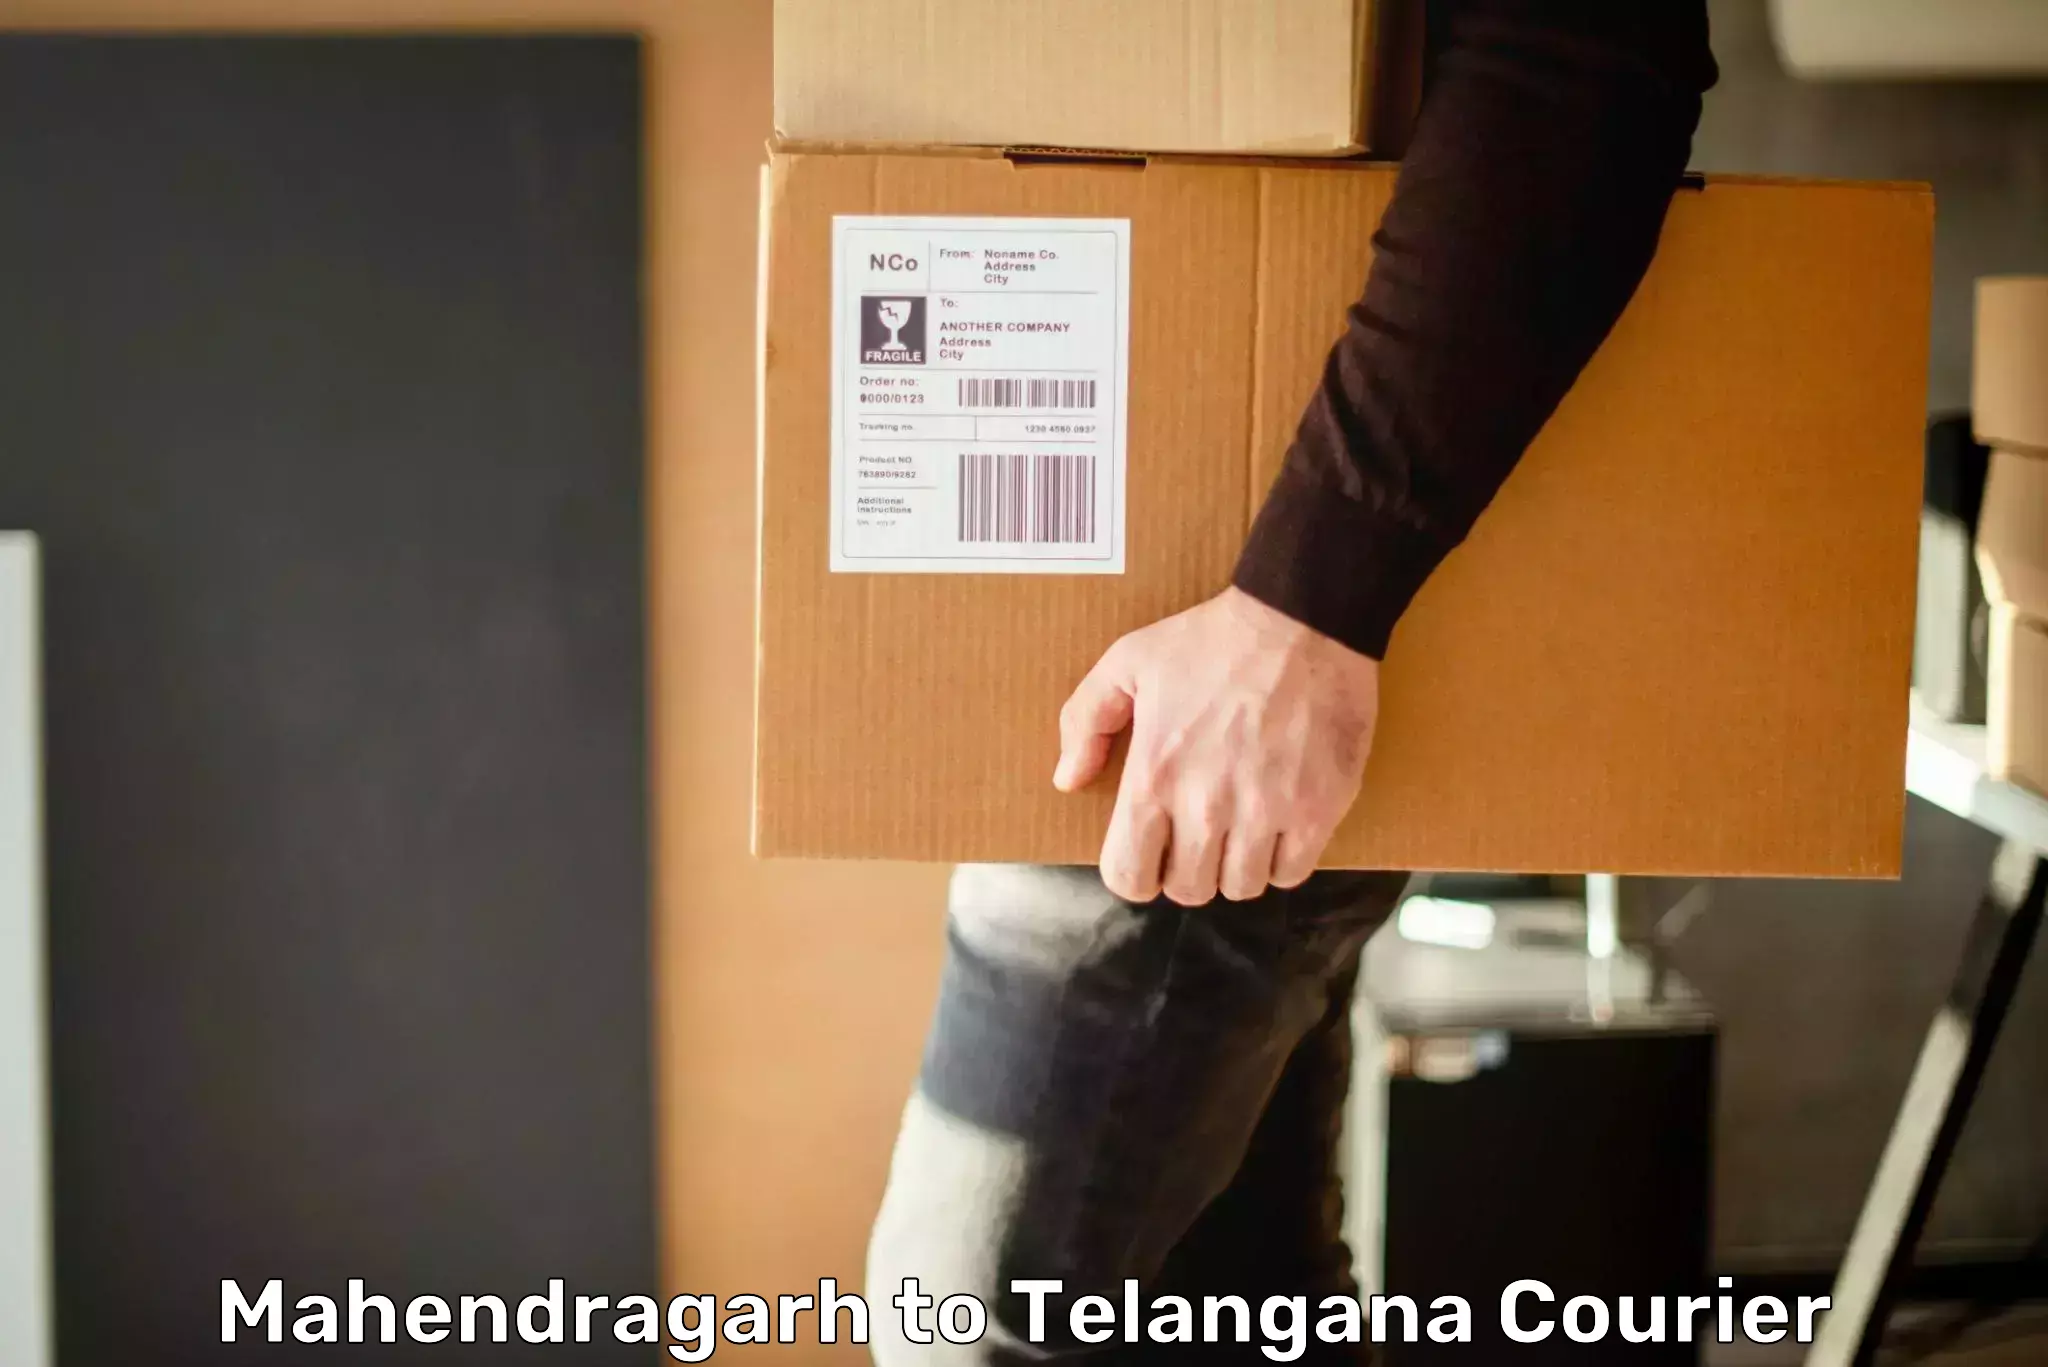 Customer-focused courier Mahendragarh to Secunderabad